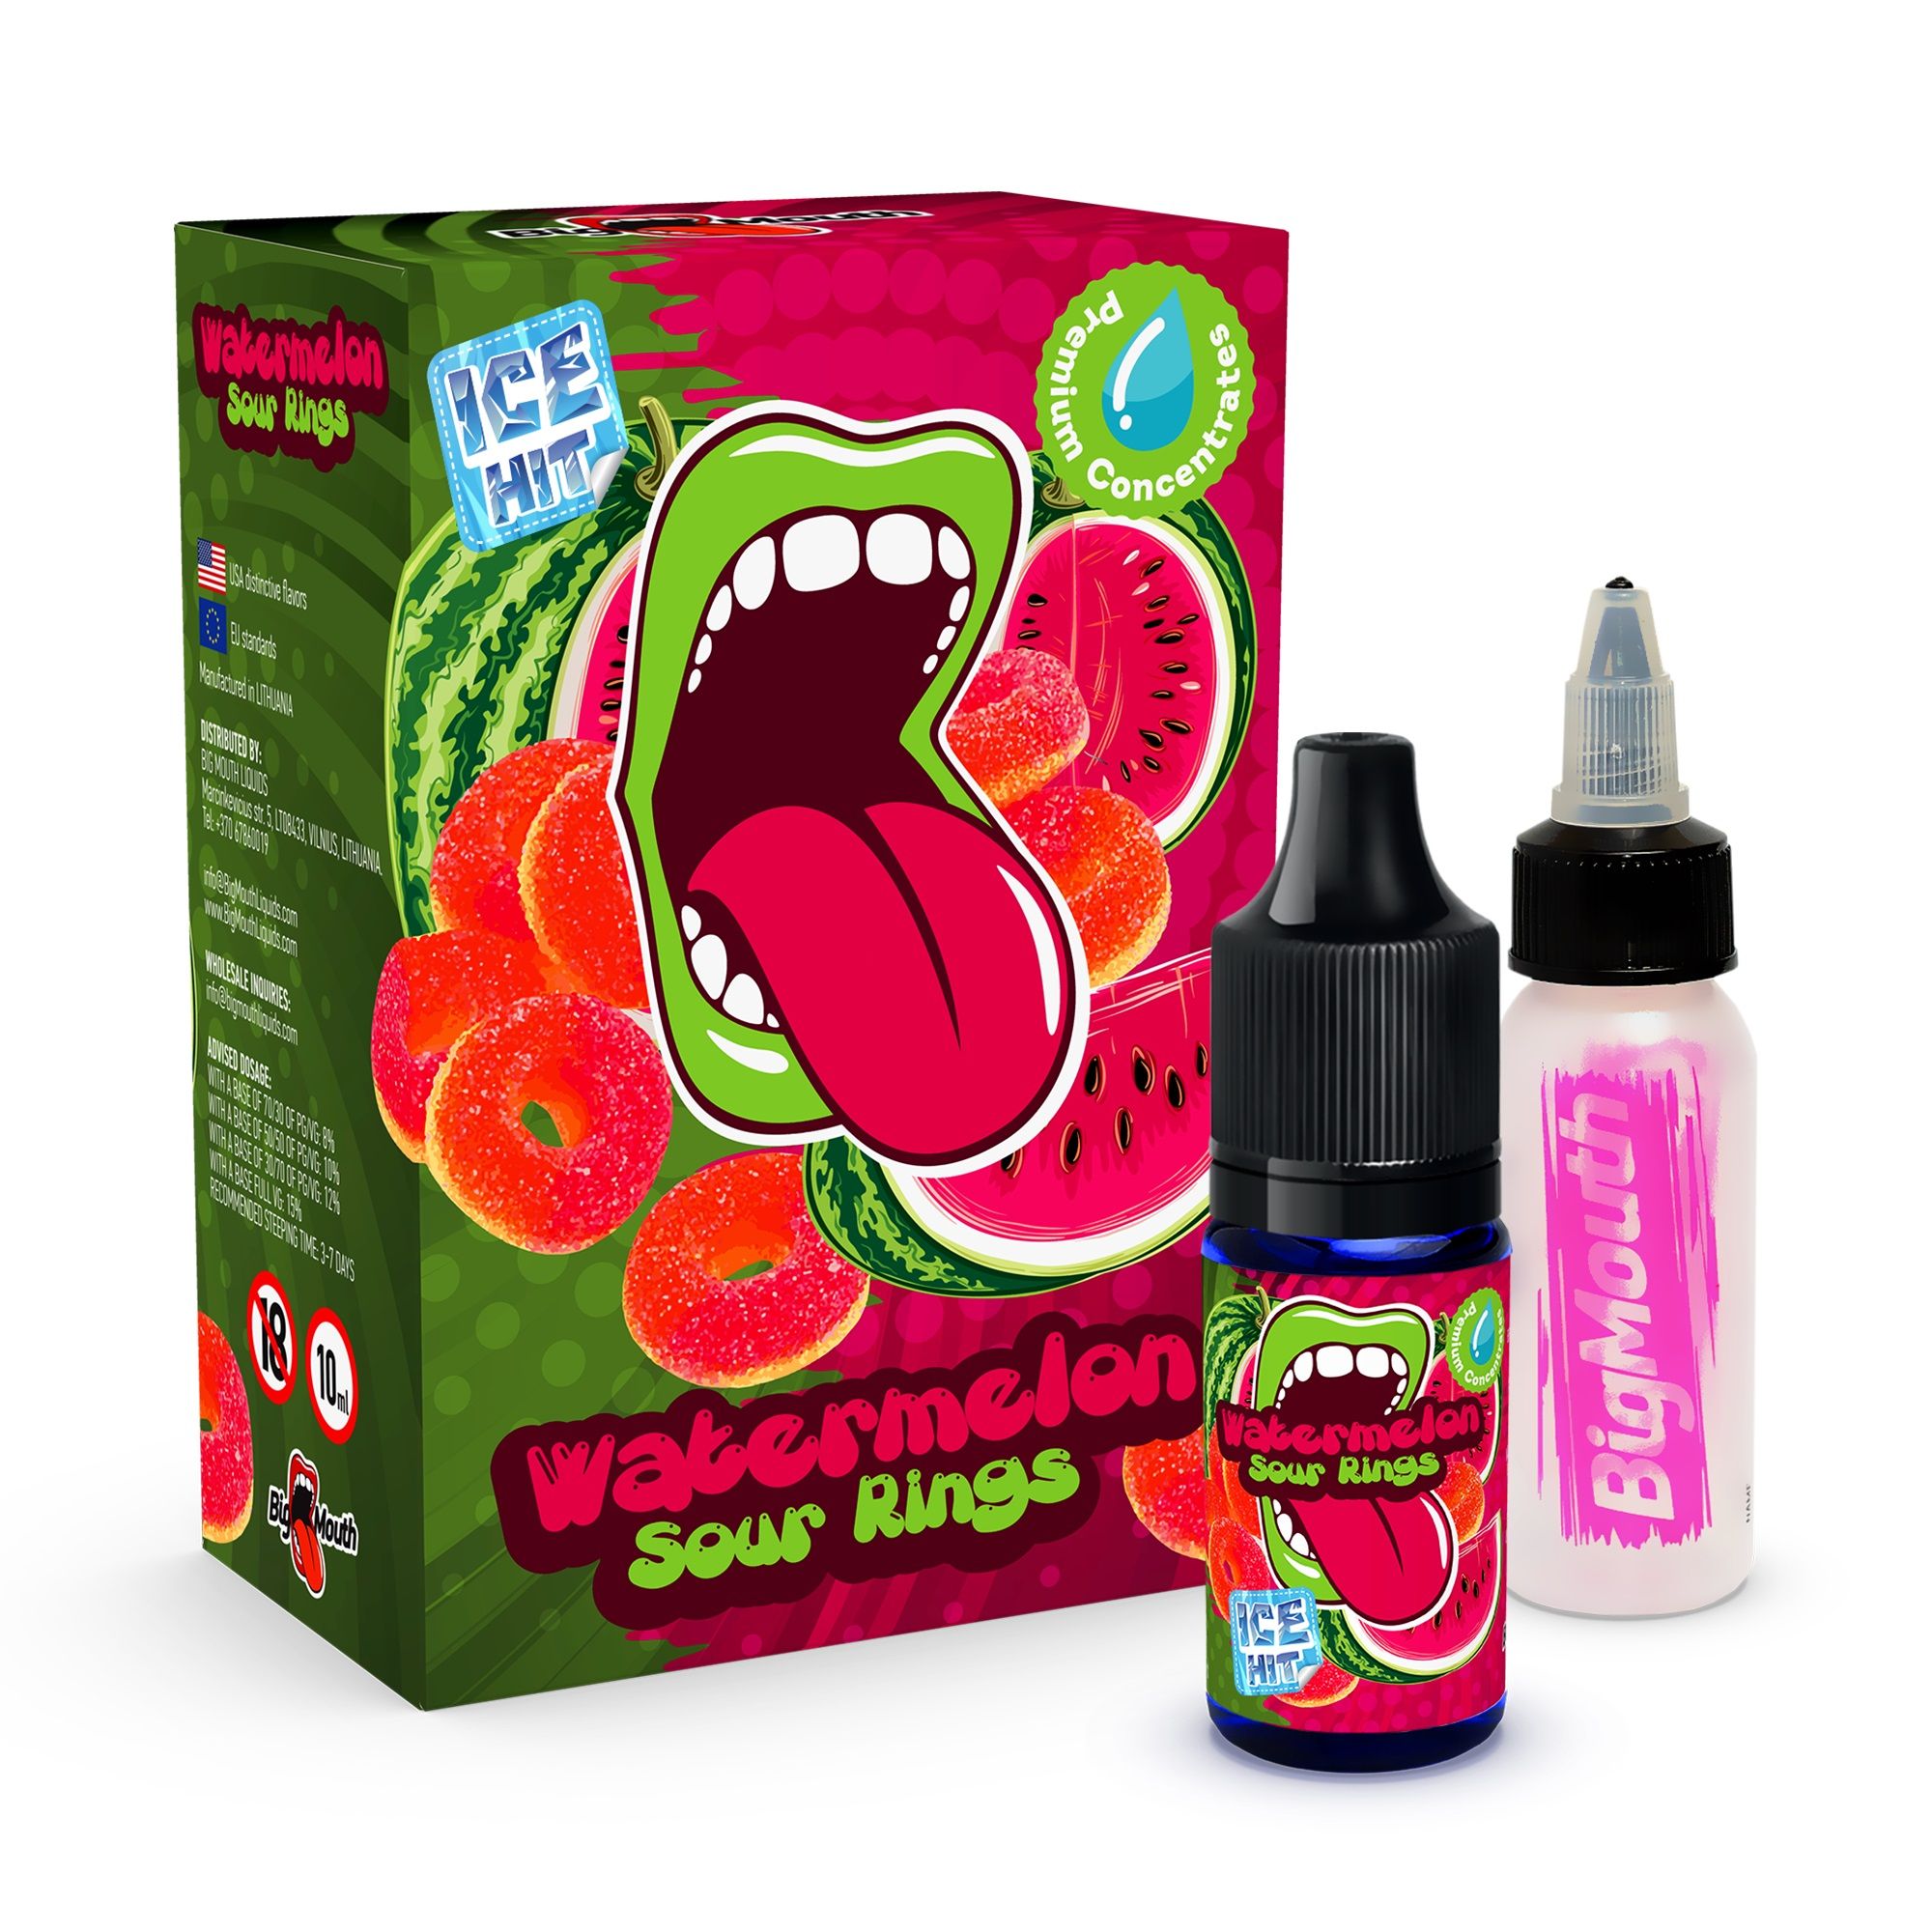 BIG MOUTH AROMA WATERMELON SOUR RINGS ICE HIT 10 ml